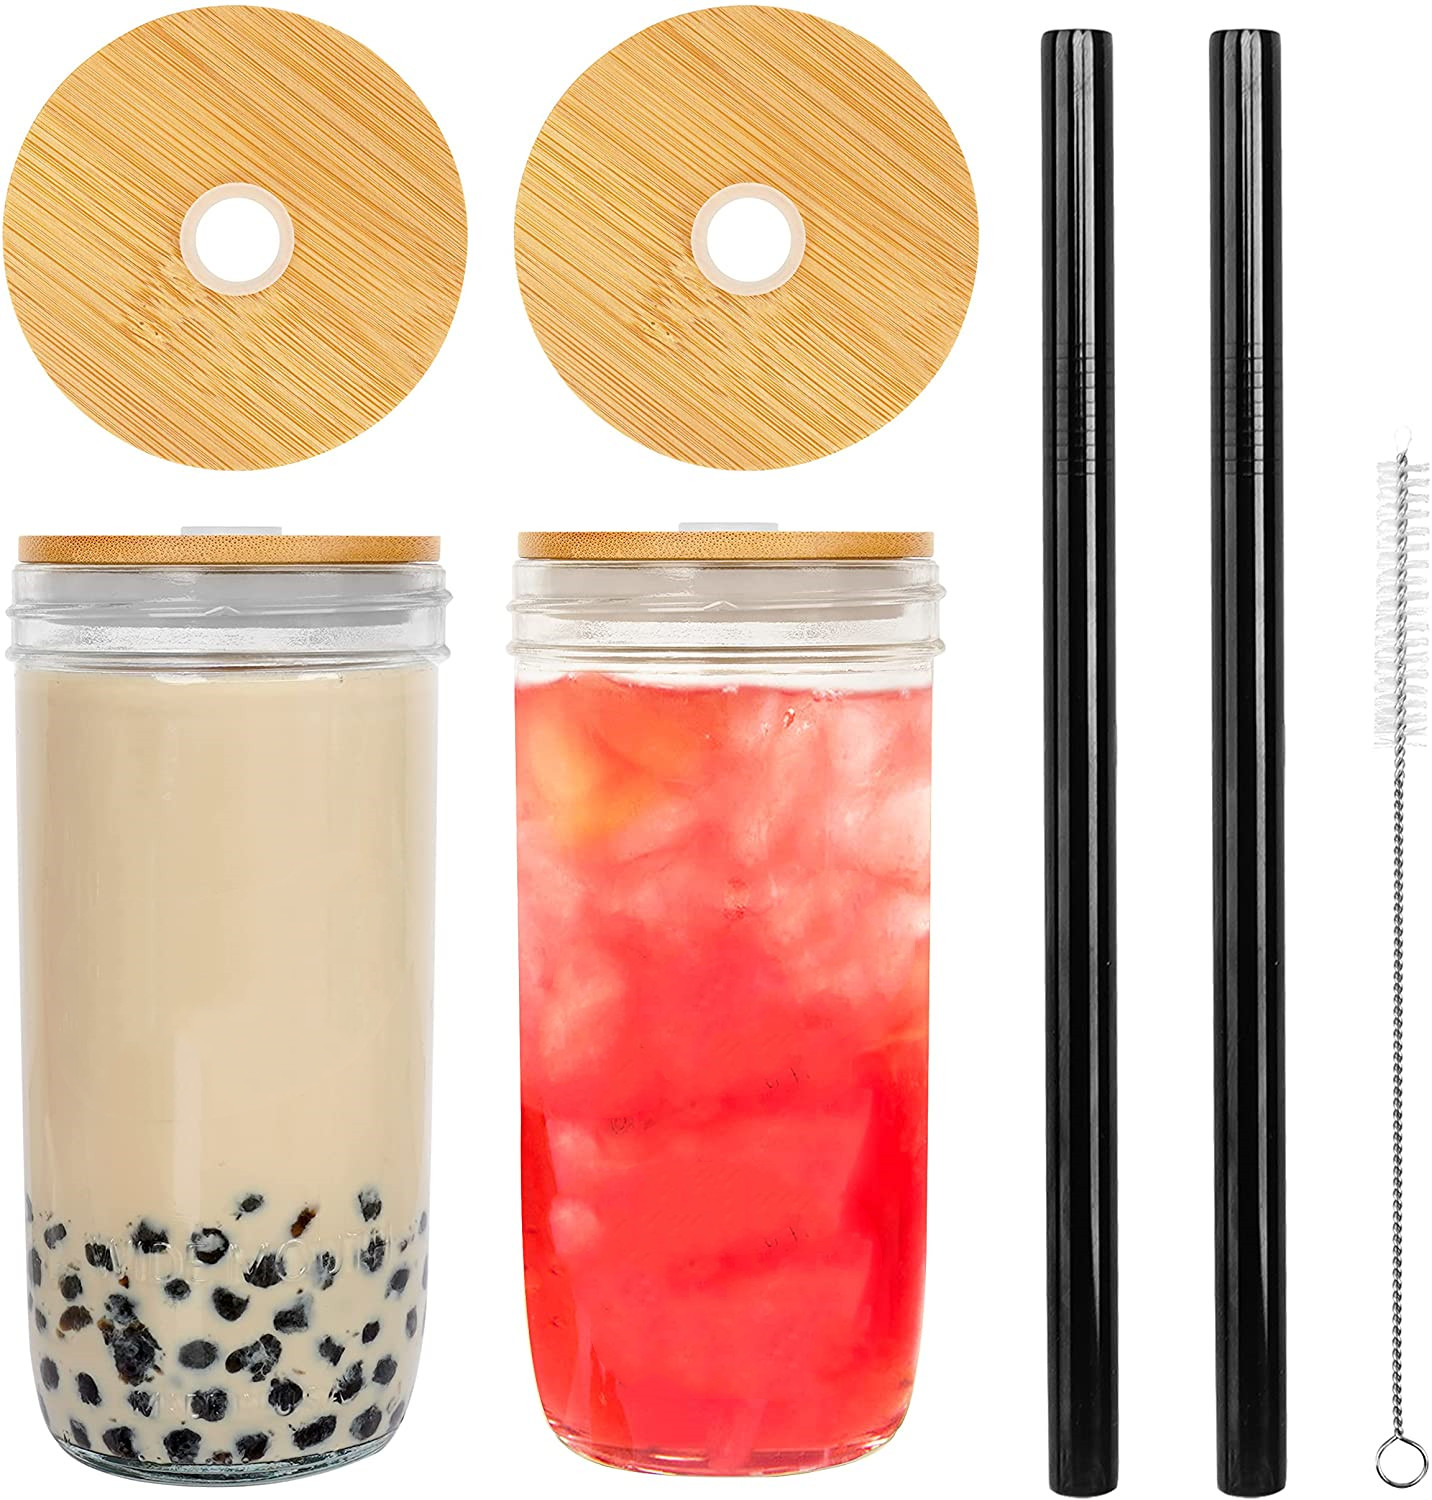 China Cheap price 304 Metal Ice Cube -  Jar Cups with Bamboo Lids Stainless Steel Straws Regular Mouth Mason Jars Drinking Clear Glasses – Shunstone